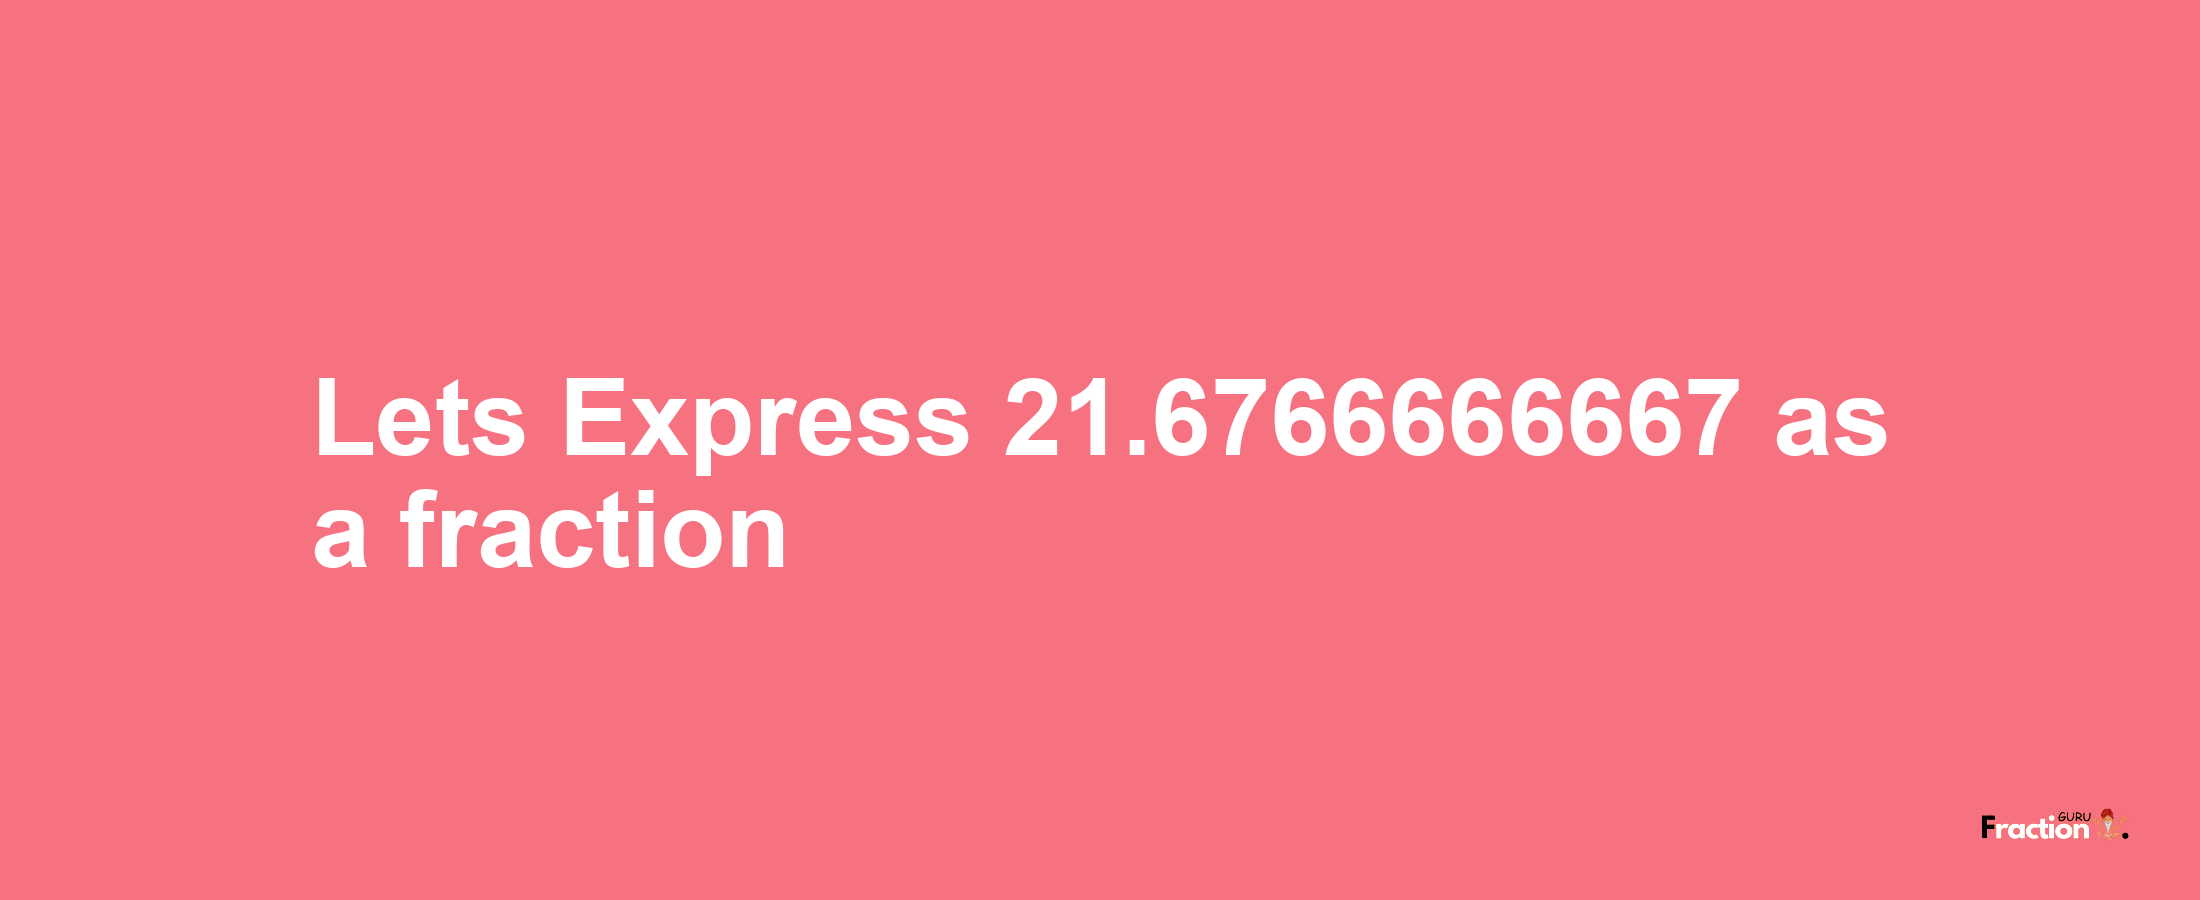 Lets Express 21.6766666667 as afraction